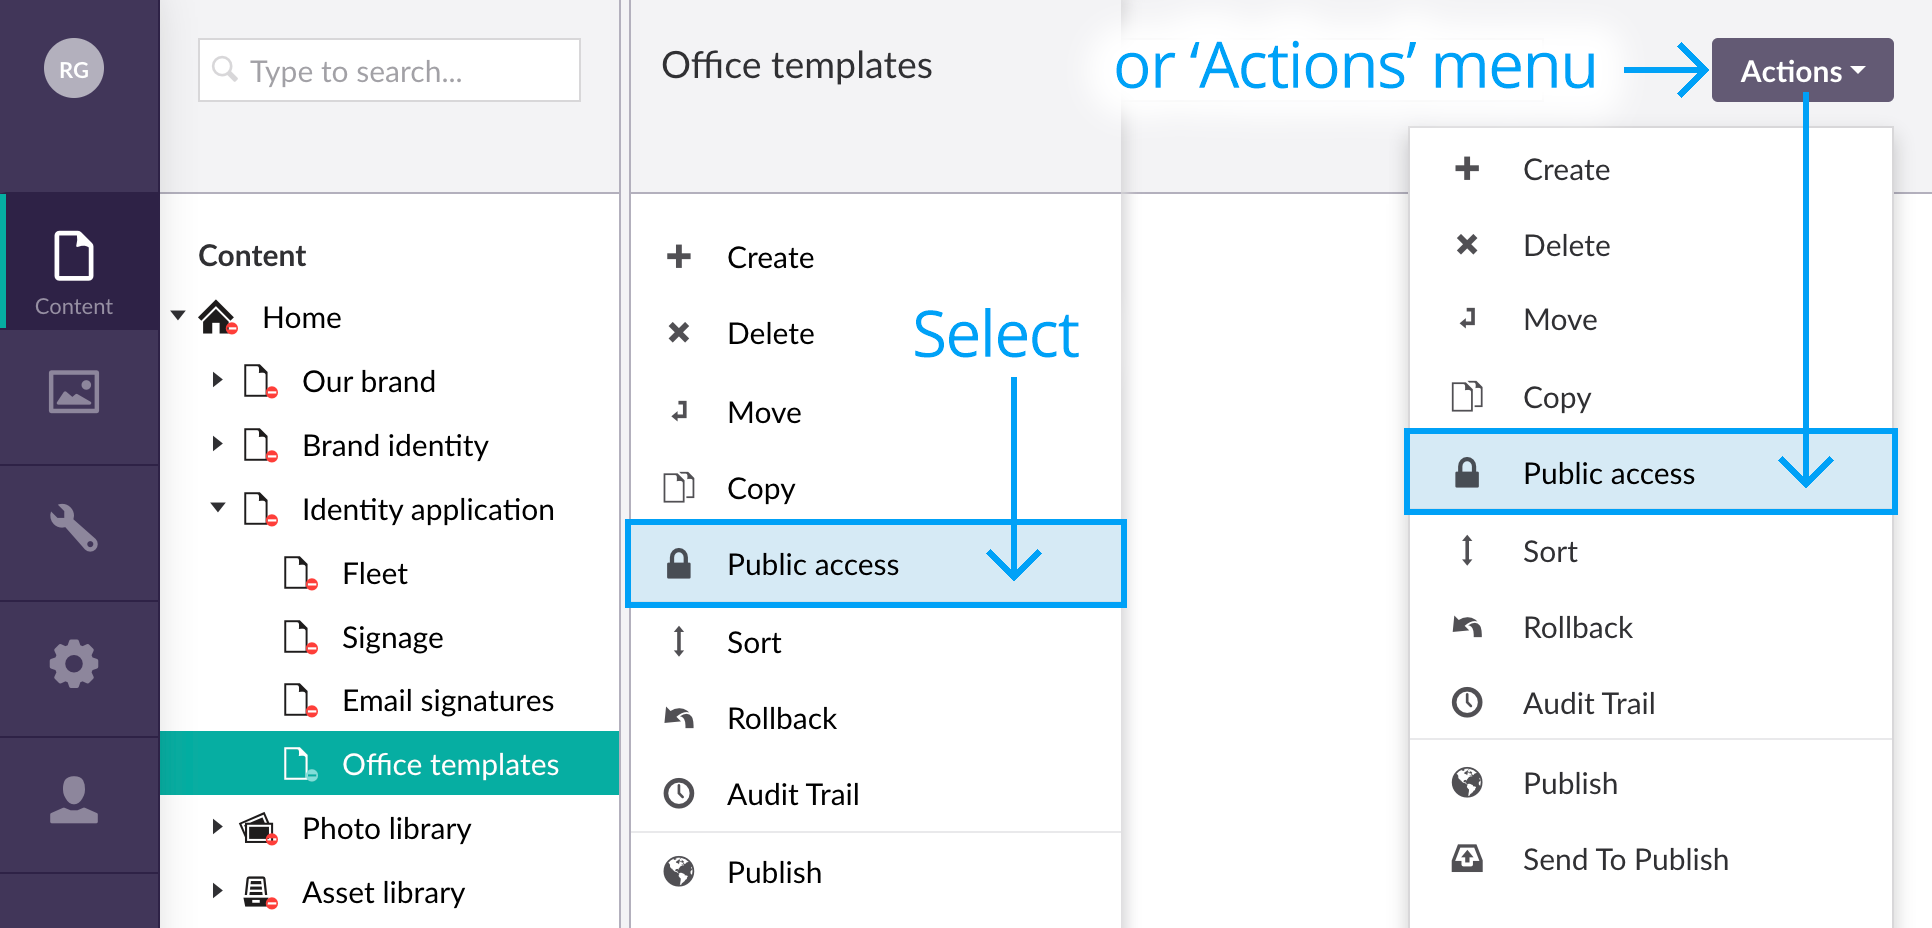 Select public access from actions menus